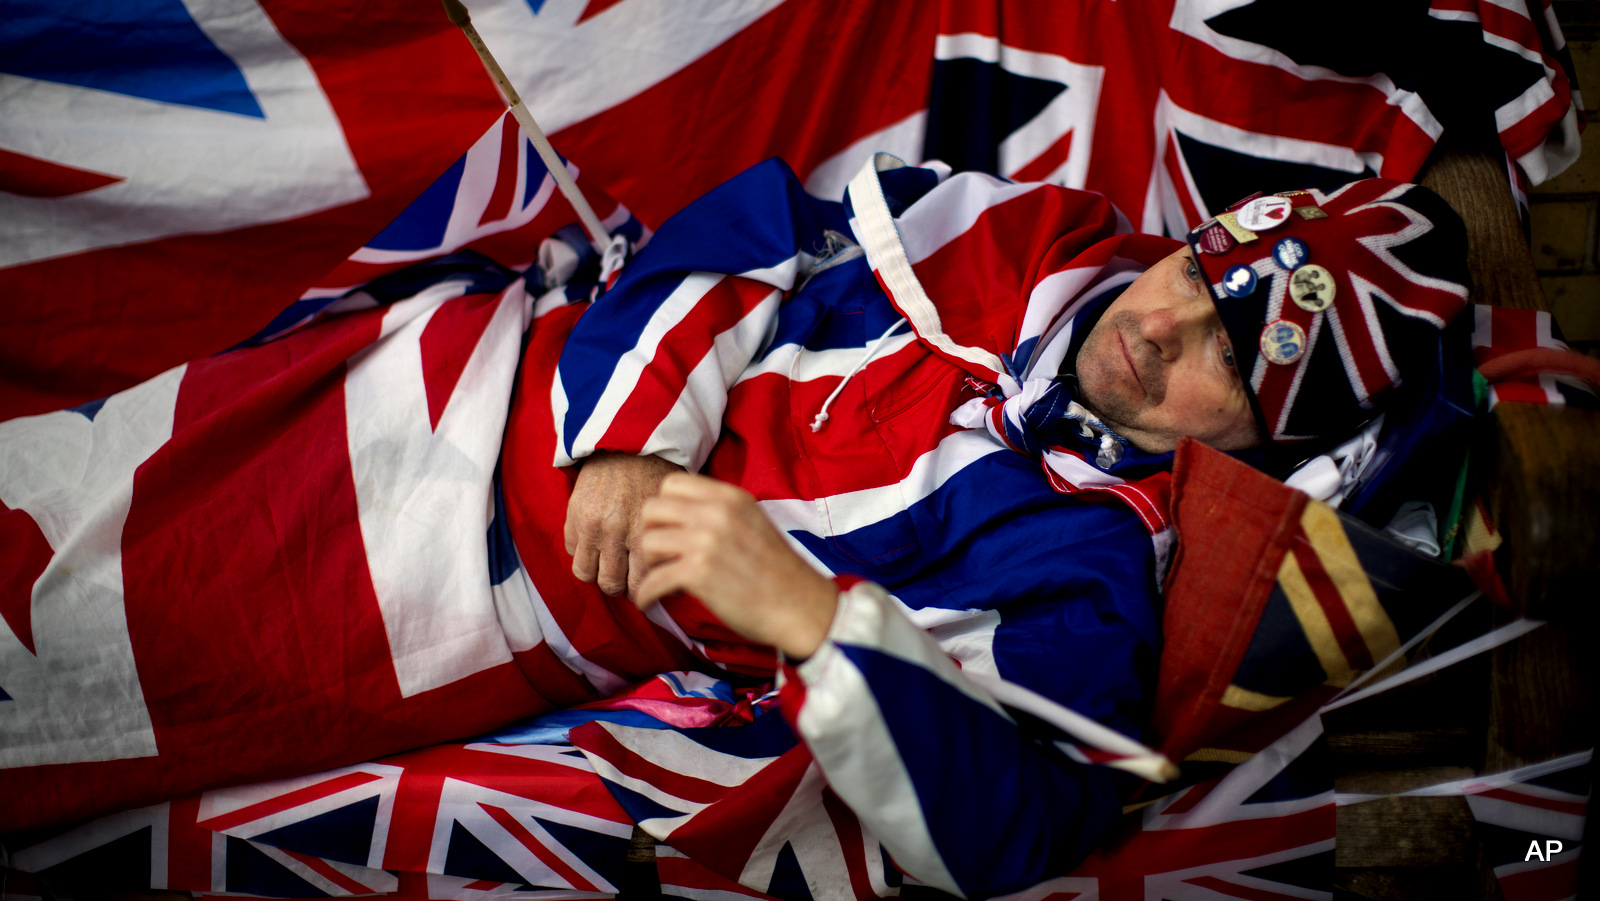 Royal fan John Loughrey, aged 60, with his Union flag designed outfit and flags demonstrates how he has laid on a bench to sleep for the last four nights across the street from the Lindo Wing of St Mary's Hospital in London, Thursday, April 23, 2015. Britain's Kate the Duchess of Cambridge is expected to give birth to her second child with her husband Prince William at the hospital in the coming days or weeks.  A small number of dedicated royal fans are waiting or camping outside the hospital awaiting the imminent birth. (AP Photo/Matt Dunham)